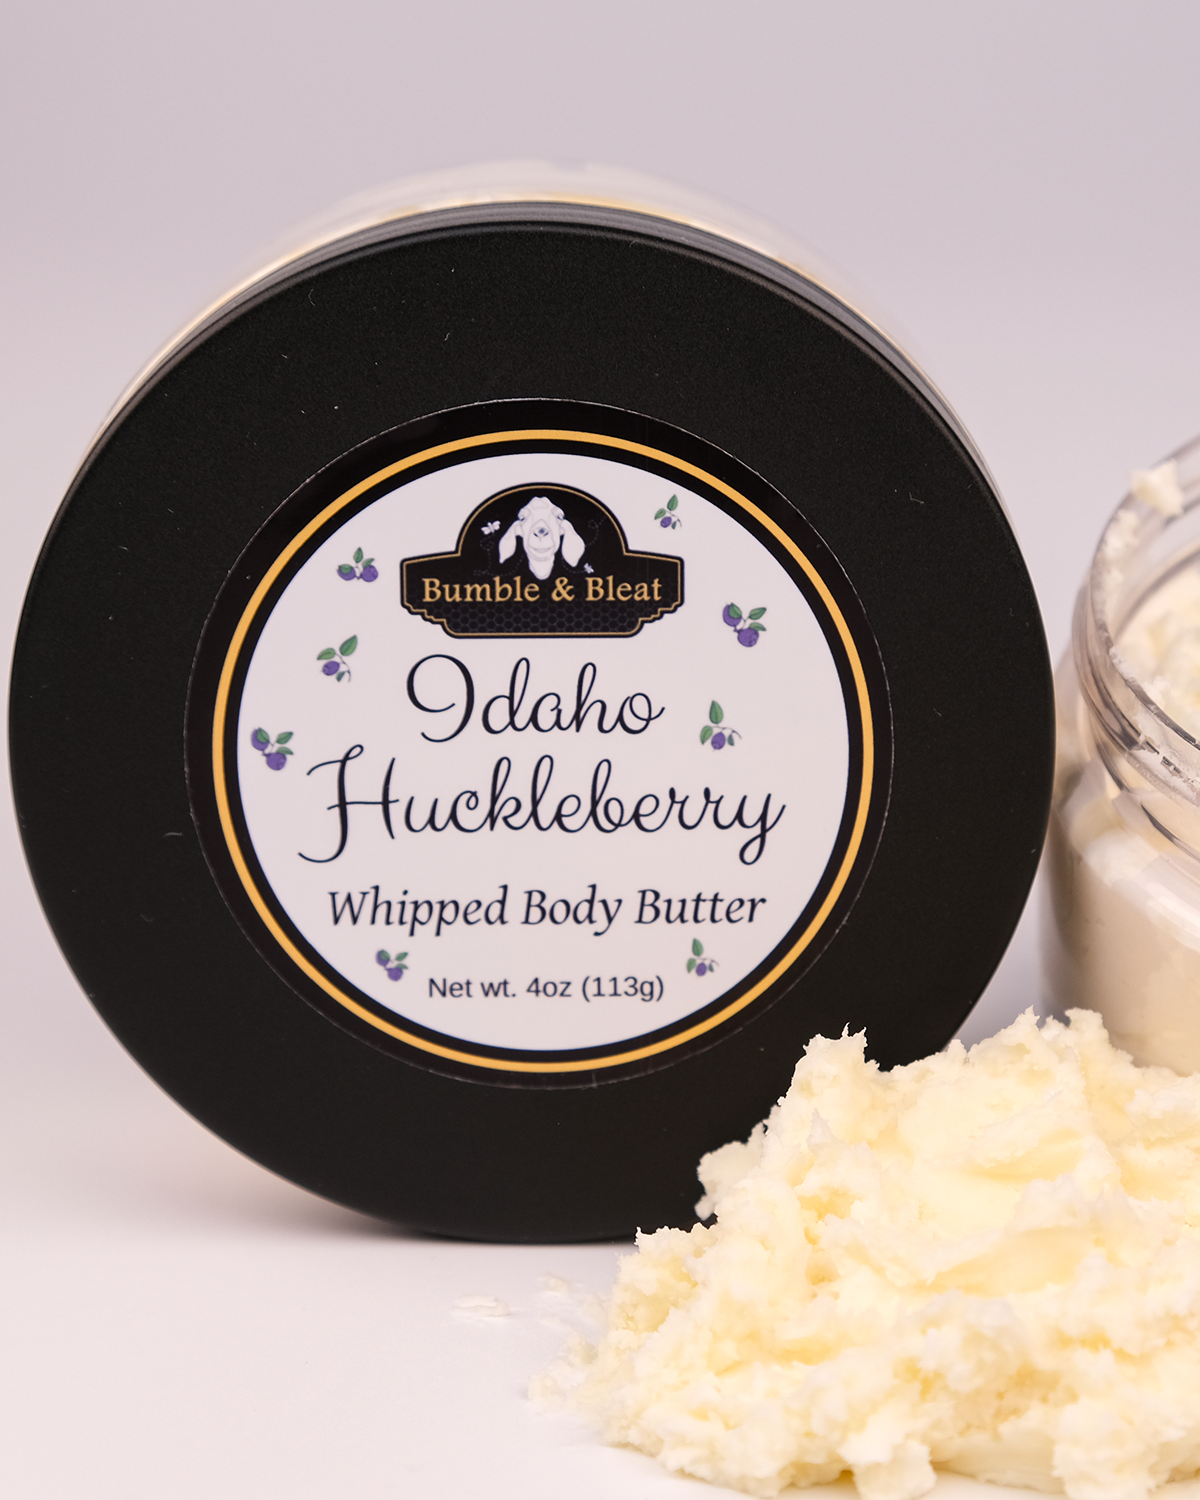 Idaho Huckleberry Whipped Body Butter